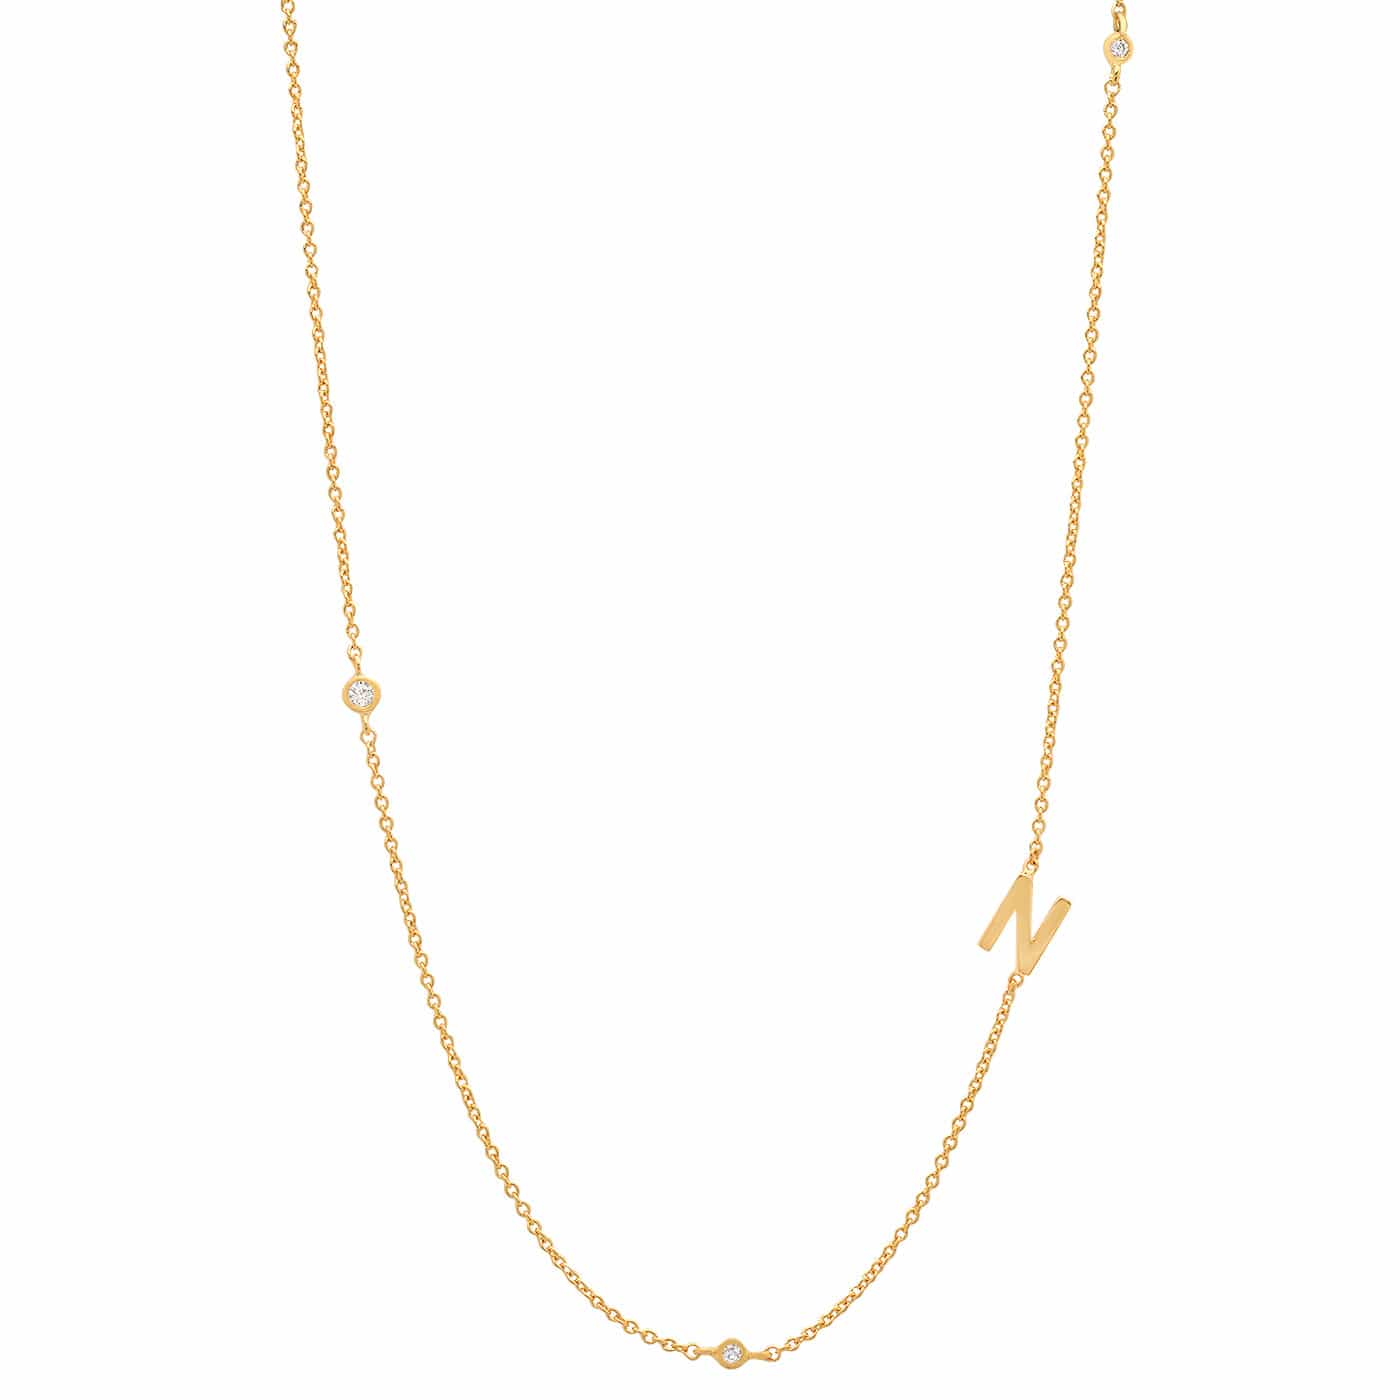 TAI JEWELRY Necklace N Sideways Initial Gold Necklace With CZ Accents